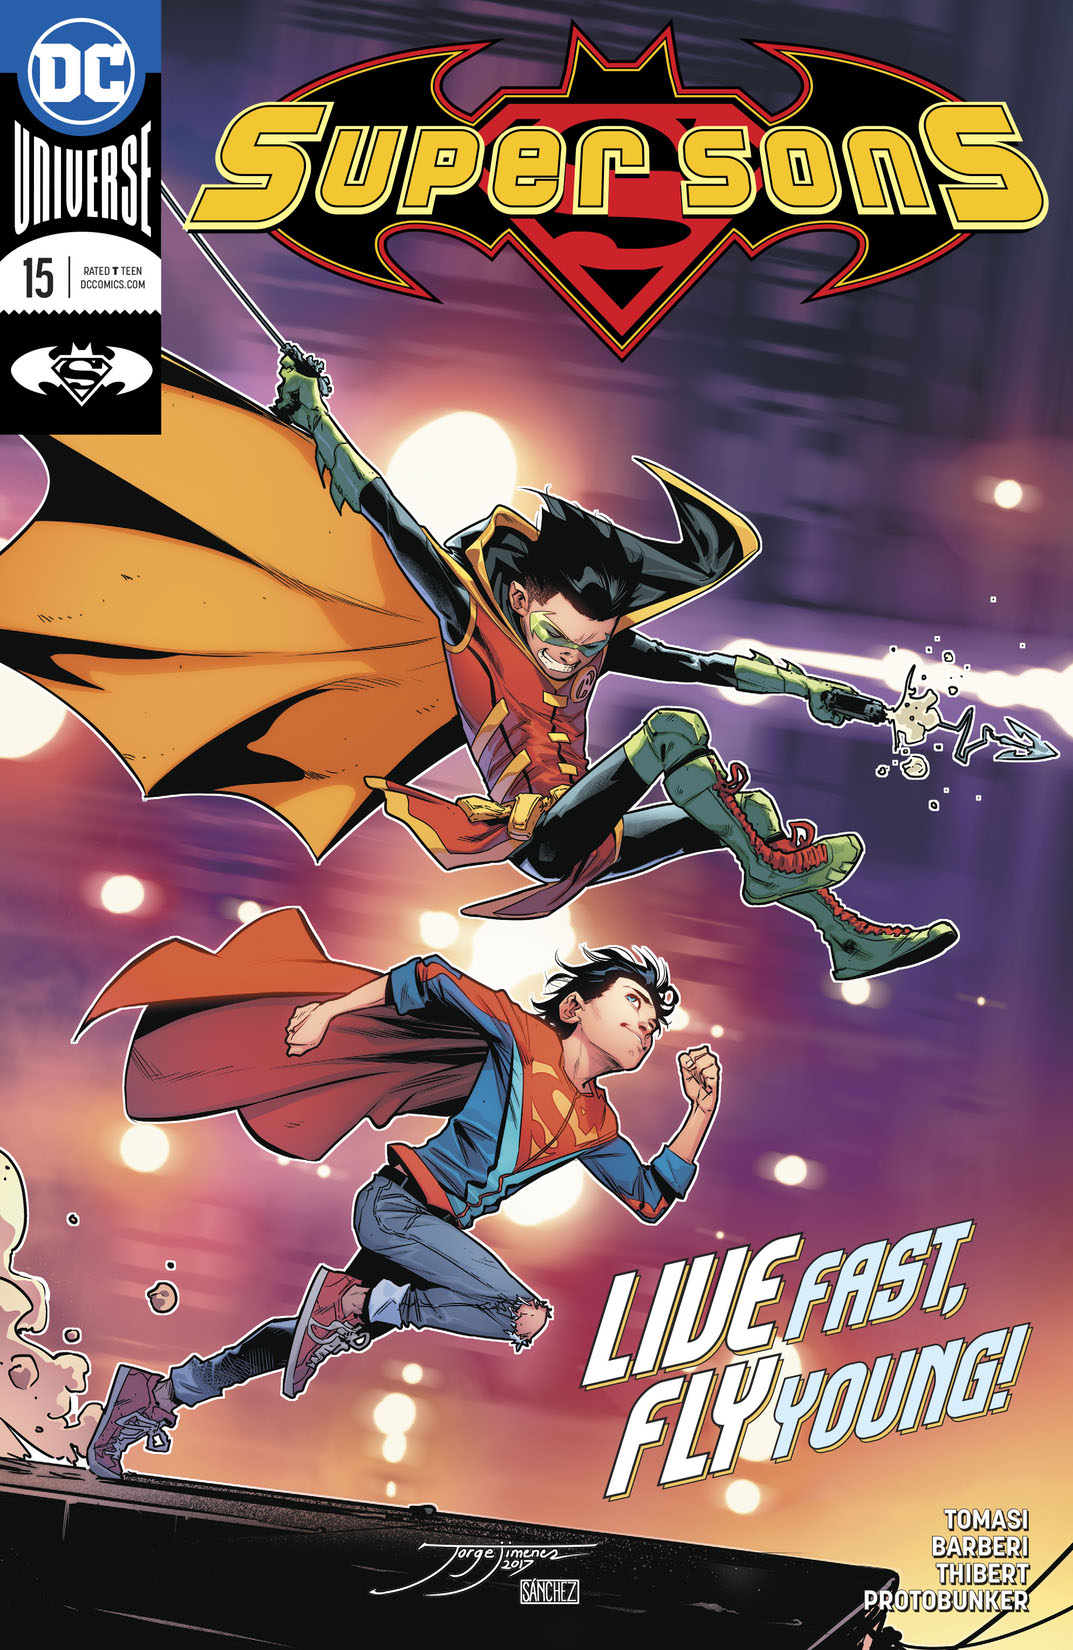 Super Sons (2017-) #15 preview images